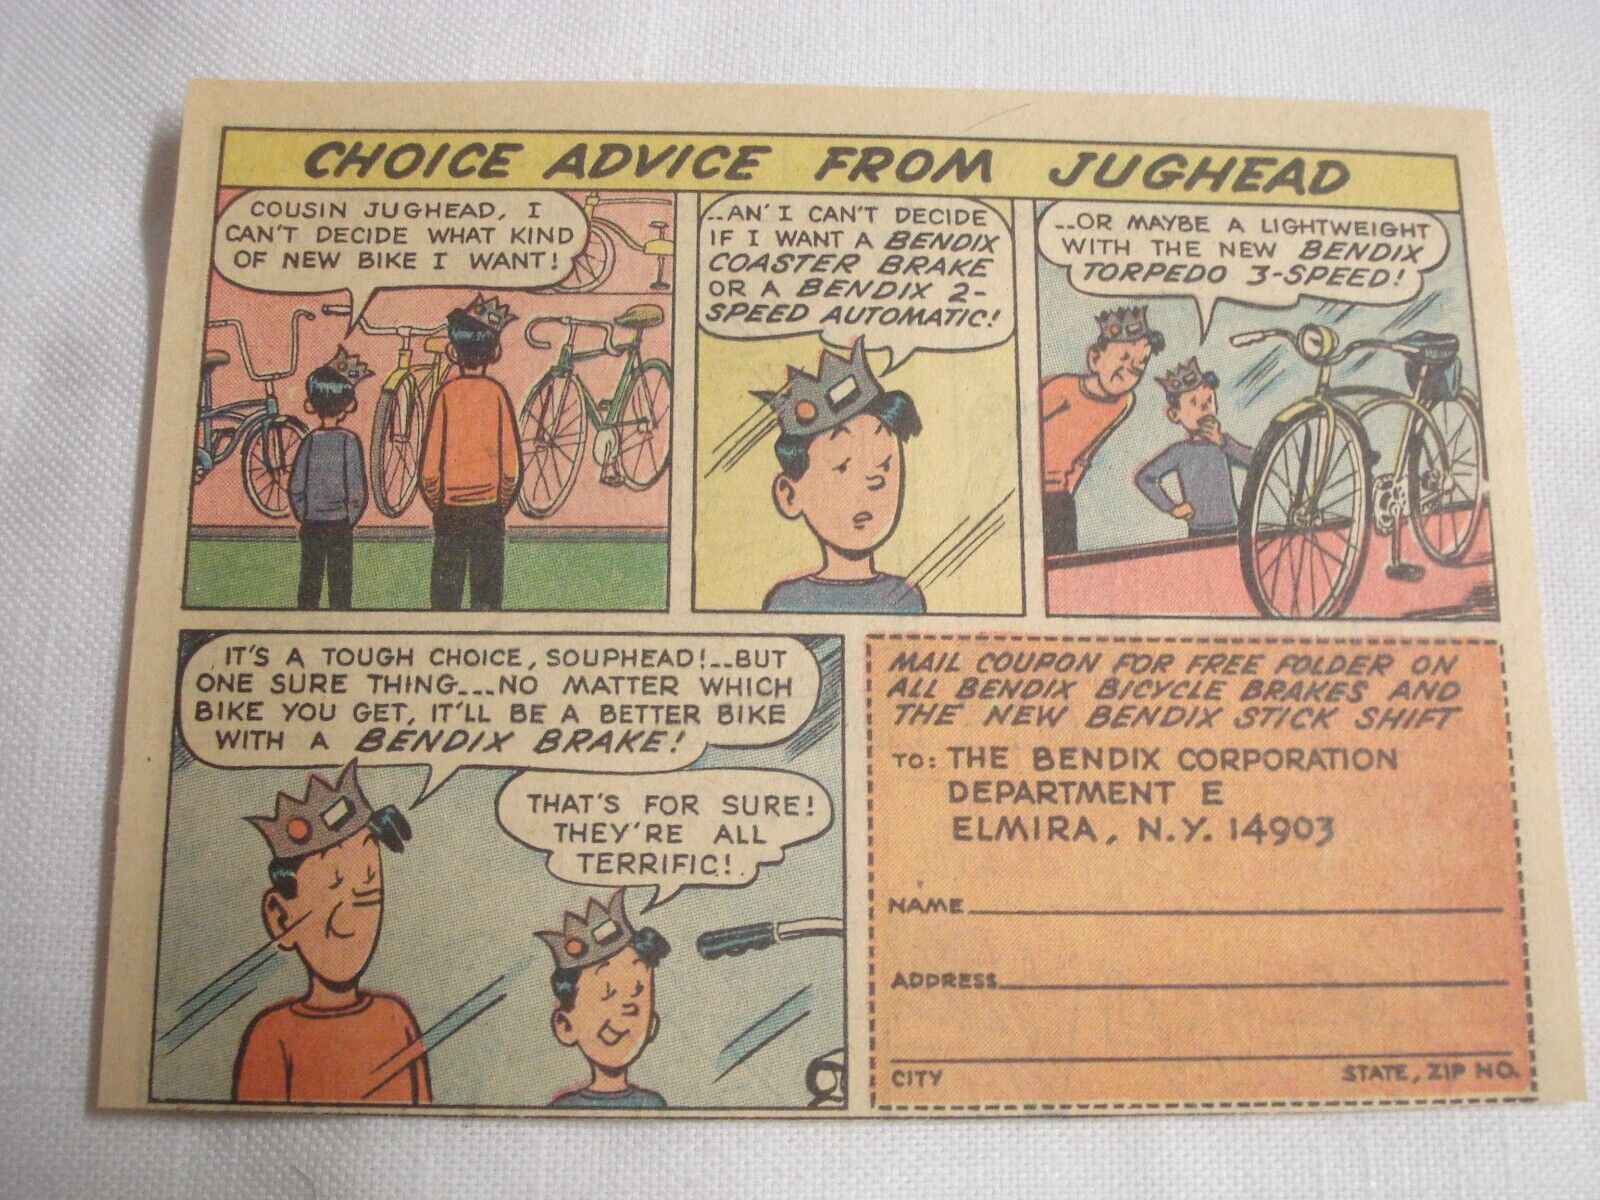 1967 Archie Comics Color Ad Bendix Bicycle Brakes Choice Advice From Jughead - $7.99